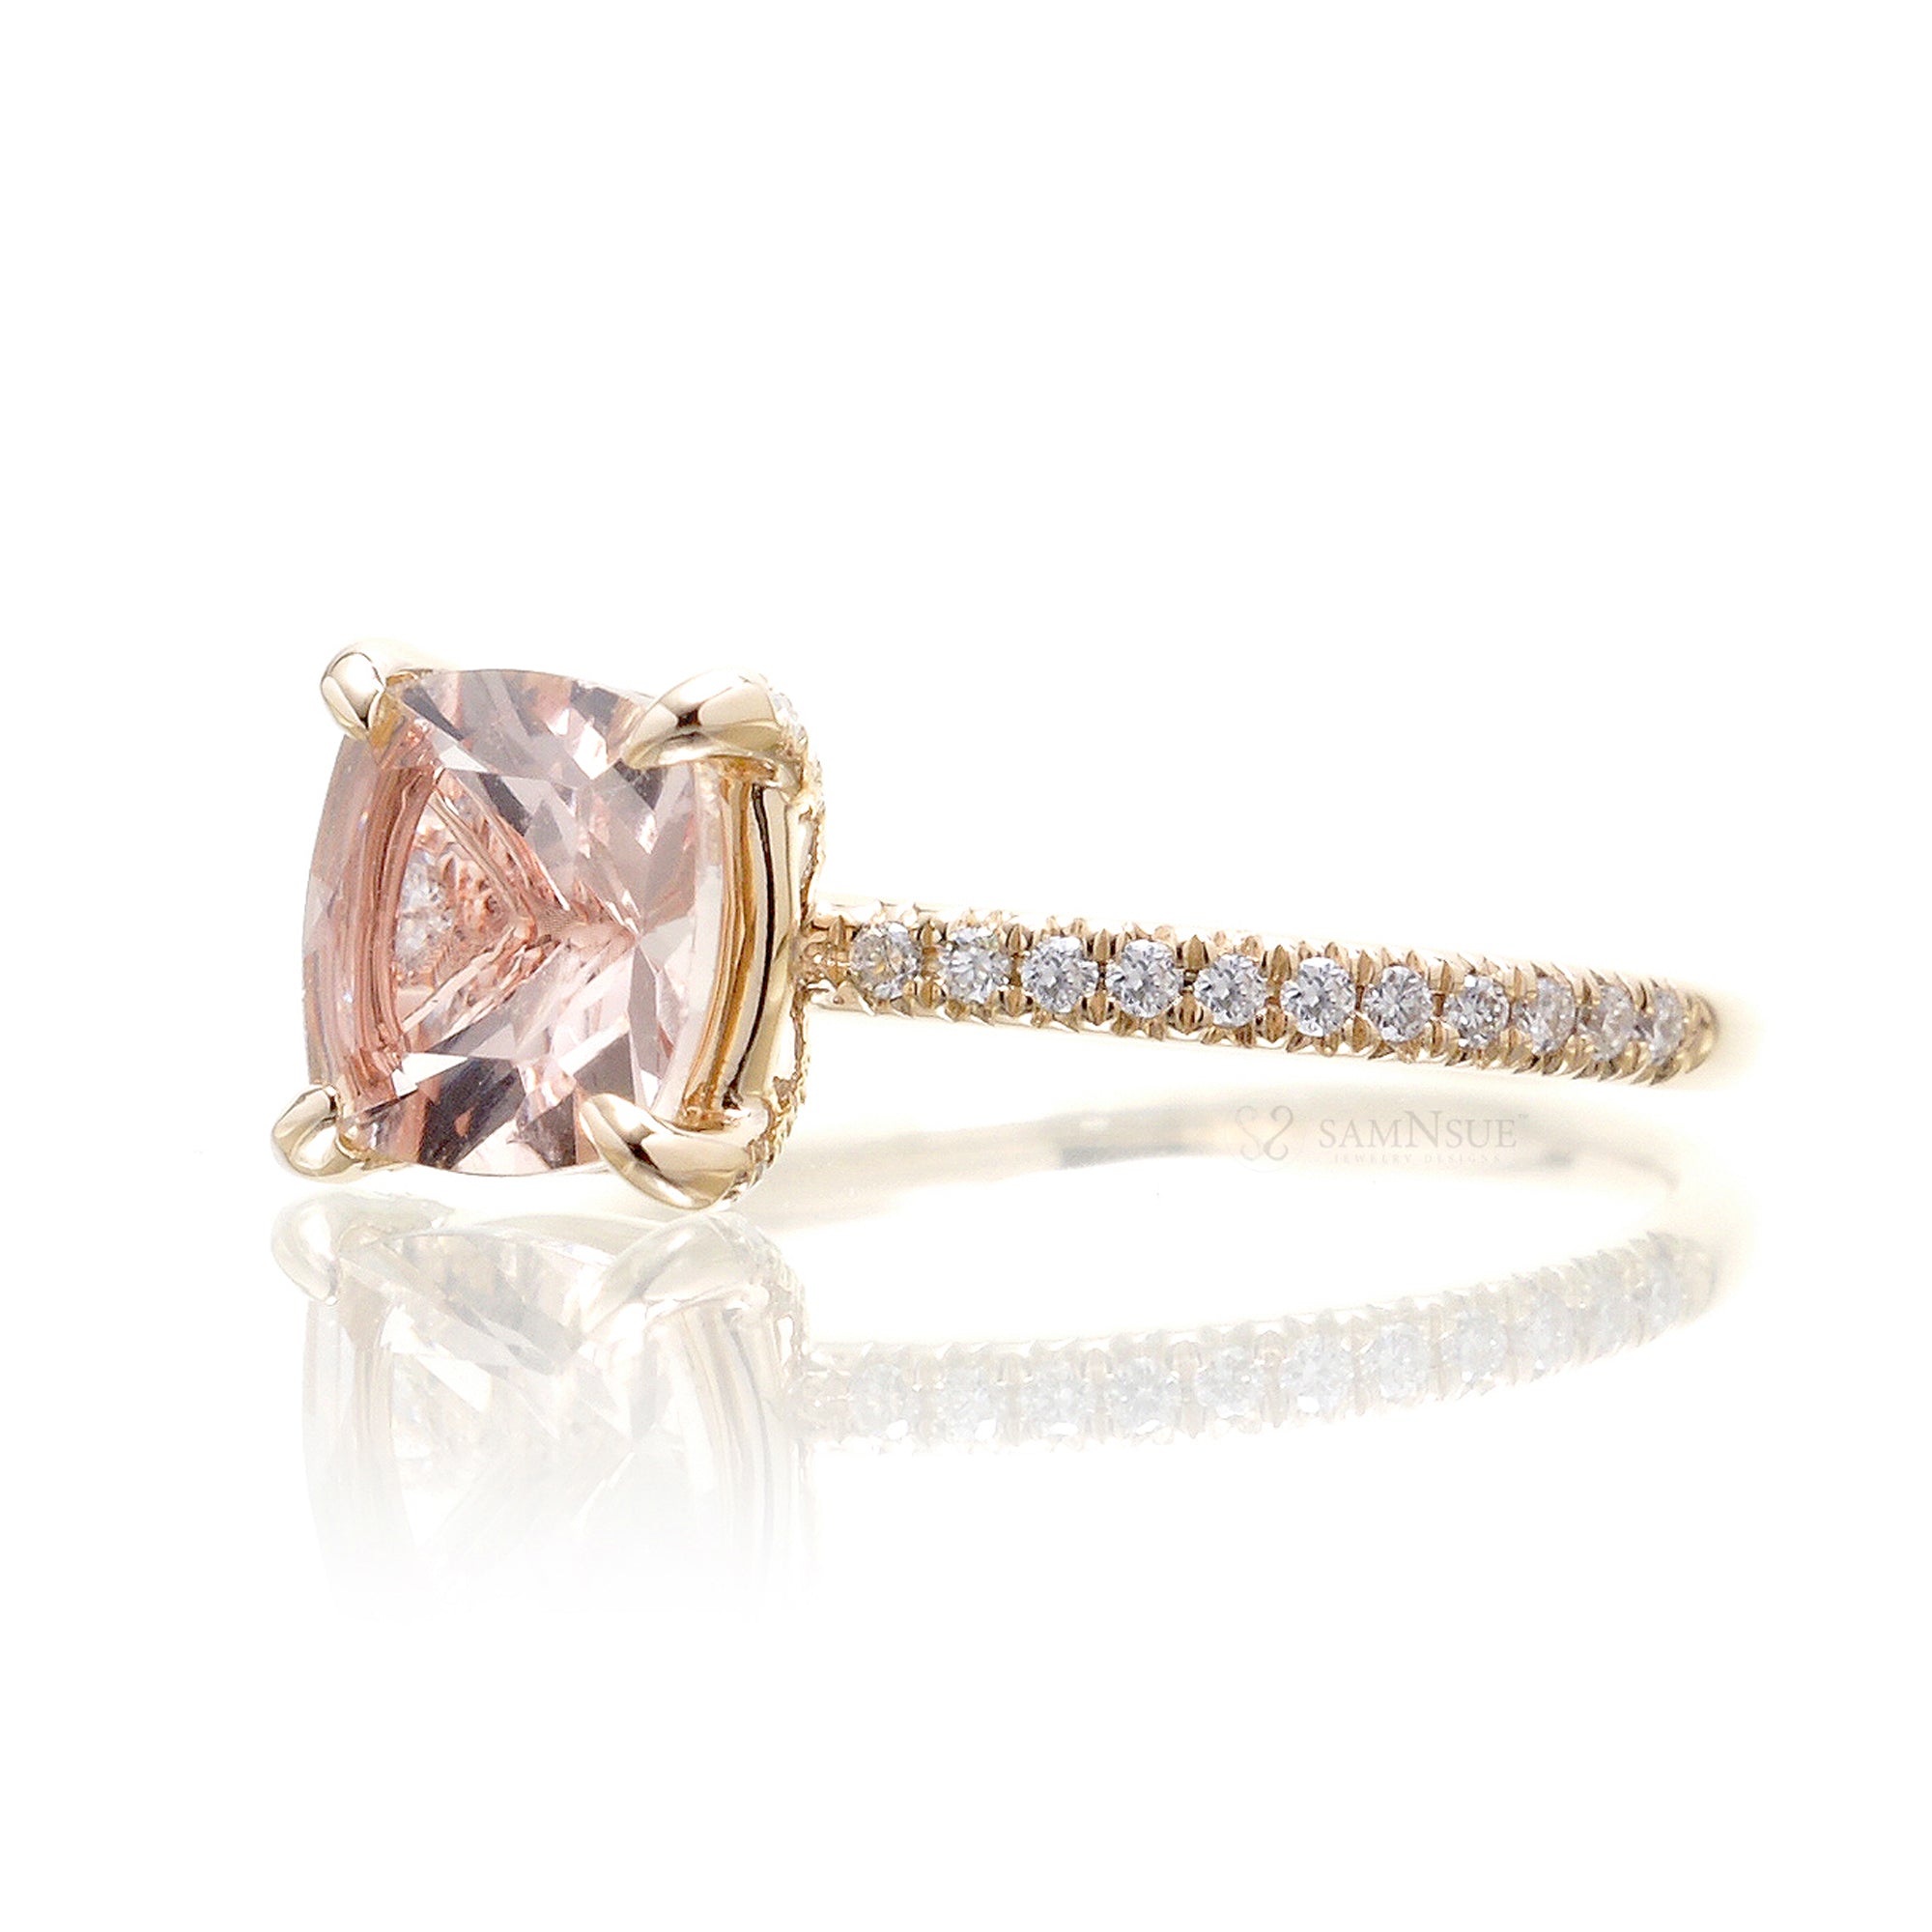 Square cushion morganite diamond band ring in yellow gold - The Ava